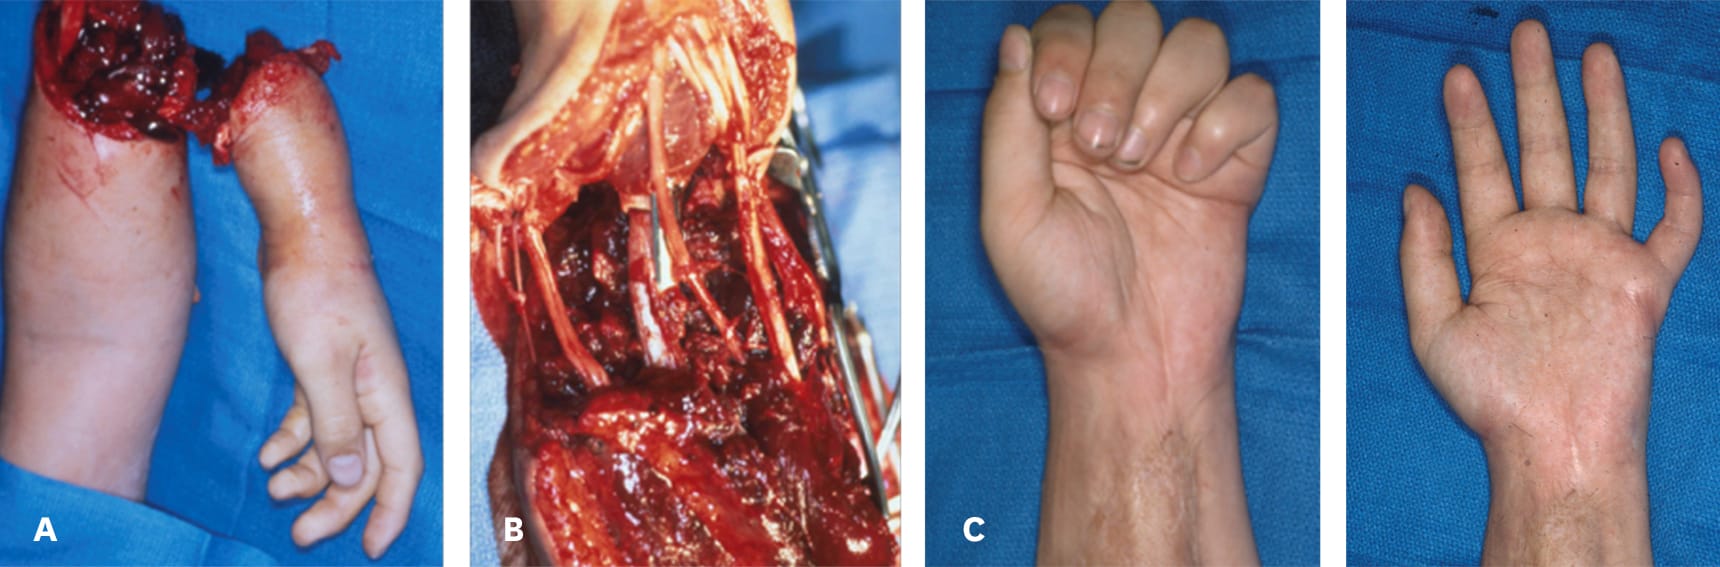 A 12-year-old patient with (a) sustained sub-total amputation of his left forearm. (b) Revascularization and repair with internal fixation. (c) Free muscle flap covering the soft tissue defect on the anterior side of the forearm.